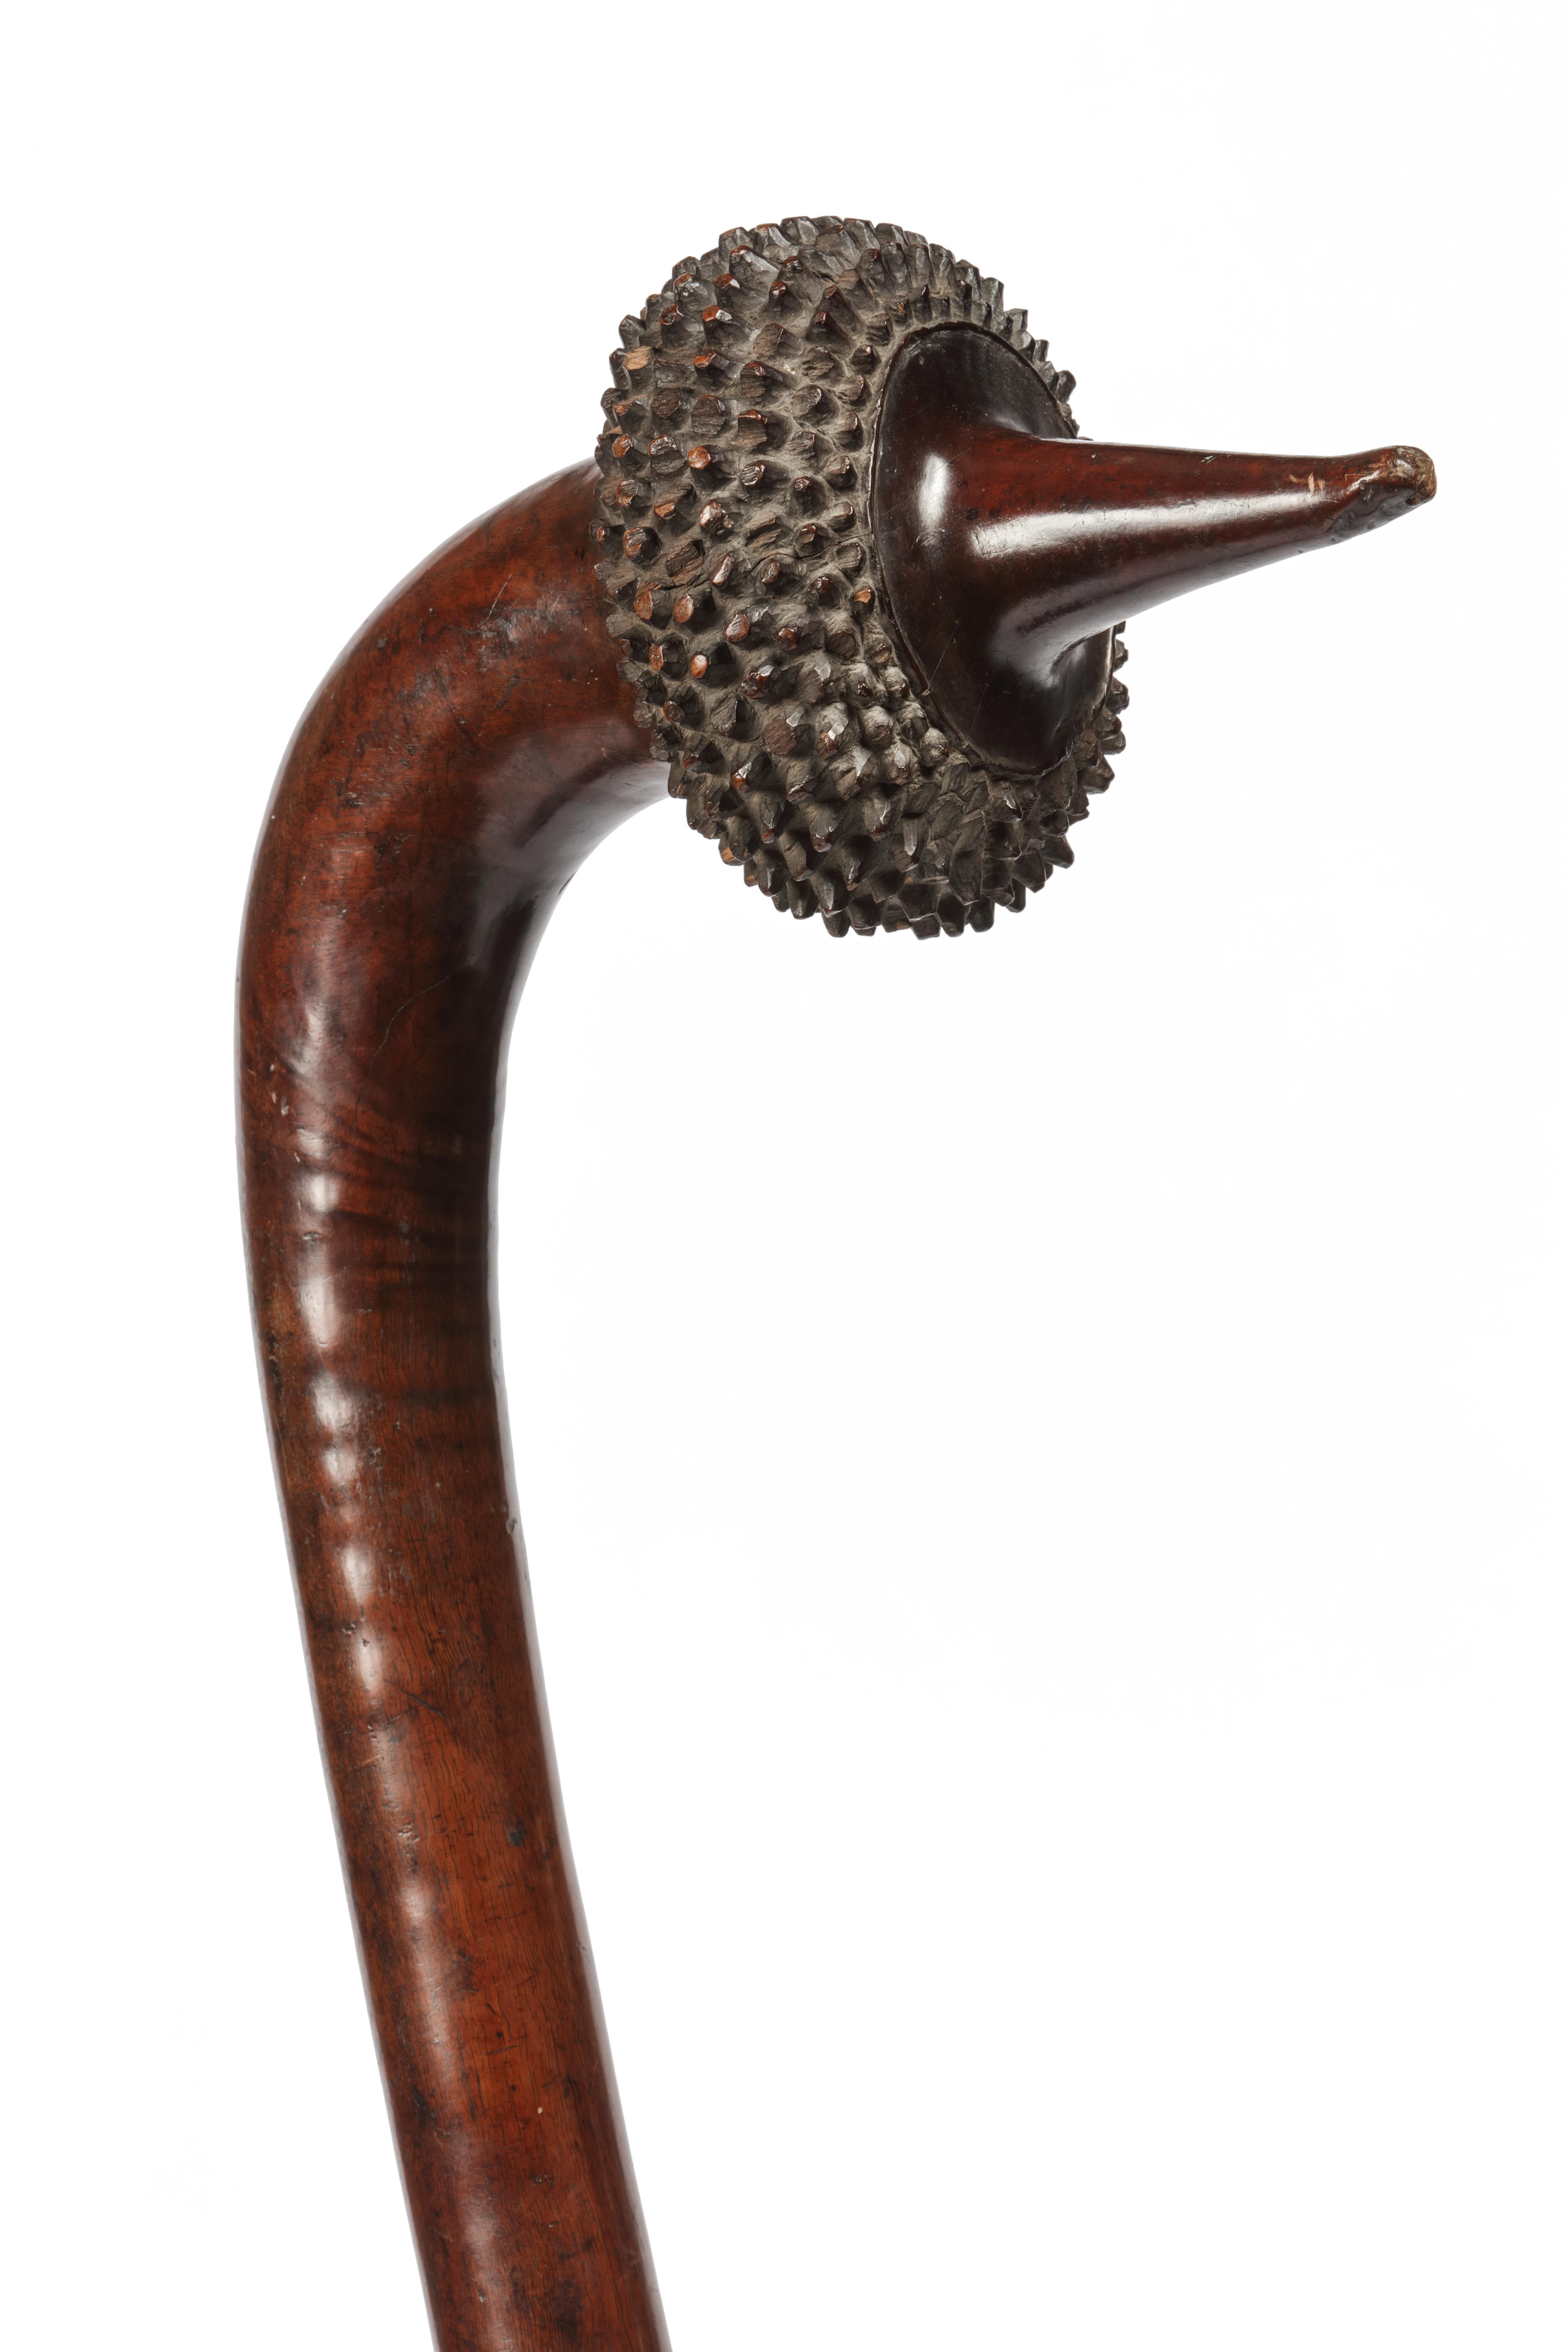 A Polynesian hardwood Totokia, war club or battle hammer 
Fiji, probably 18th century or earlier

Measures: Height. 83 cm

Including museum-quality powder-coated stand.

Provenance:
Private collection, France

The curve in the Totokia